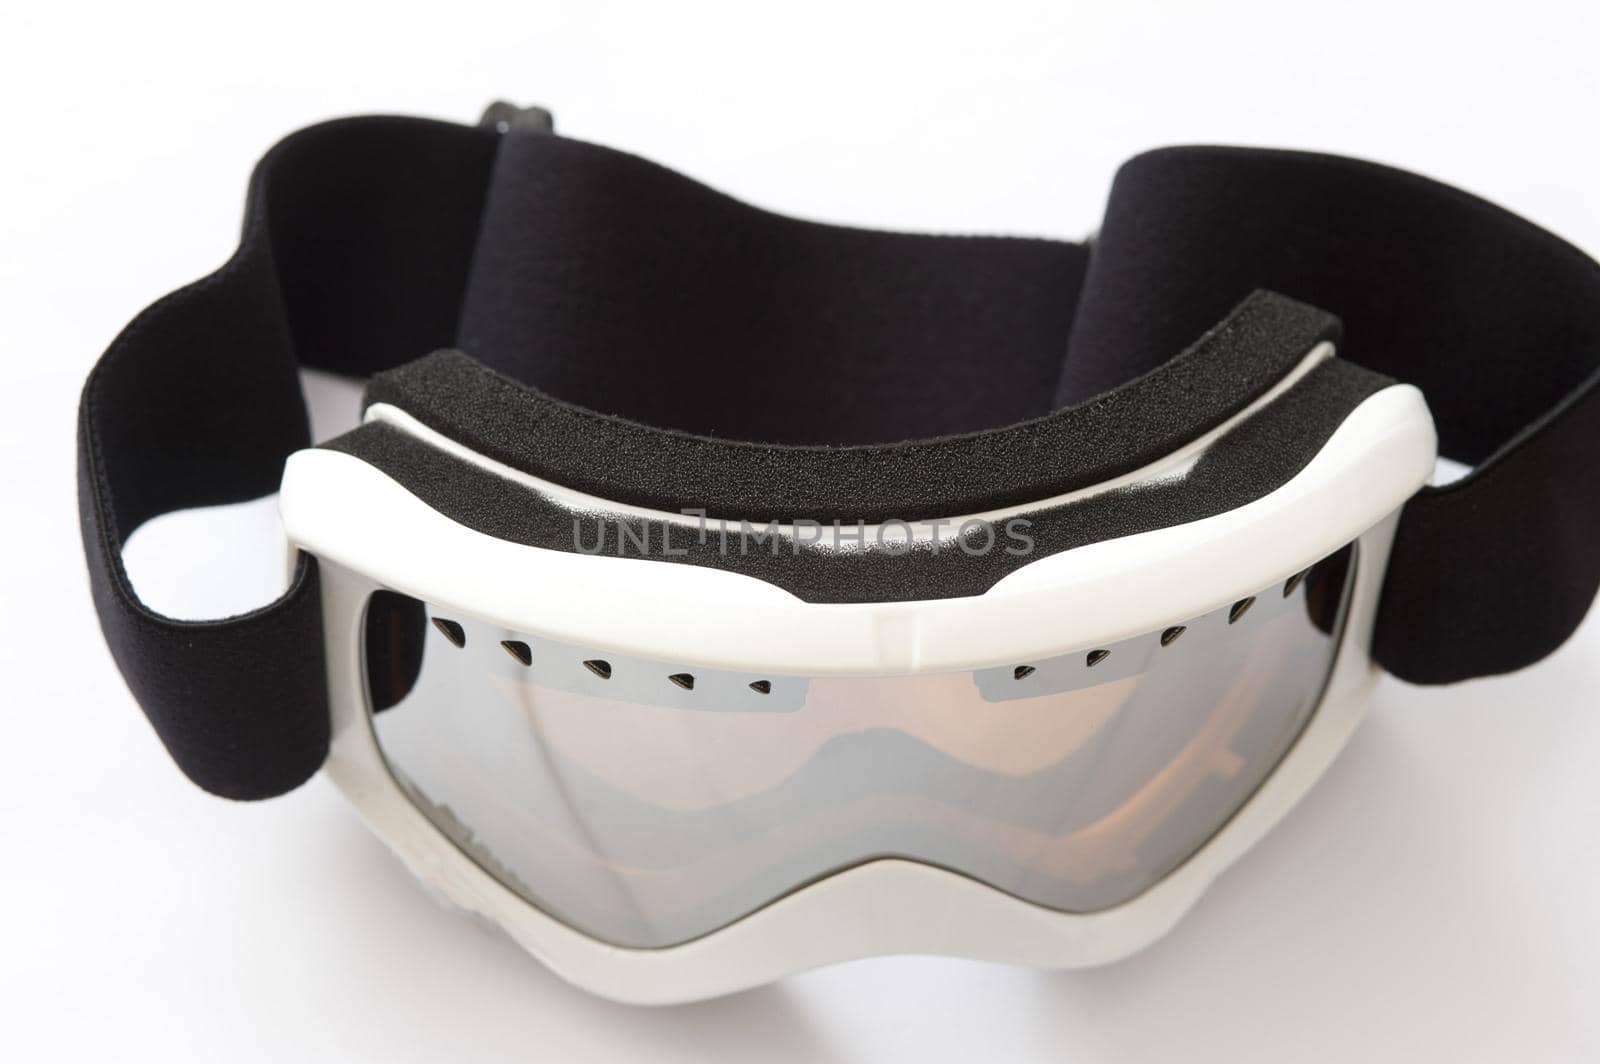 Snowboarding goggles on a white background by sanisra